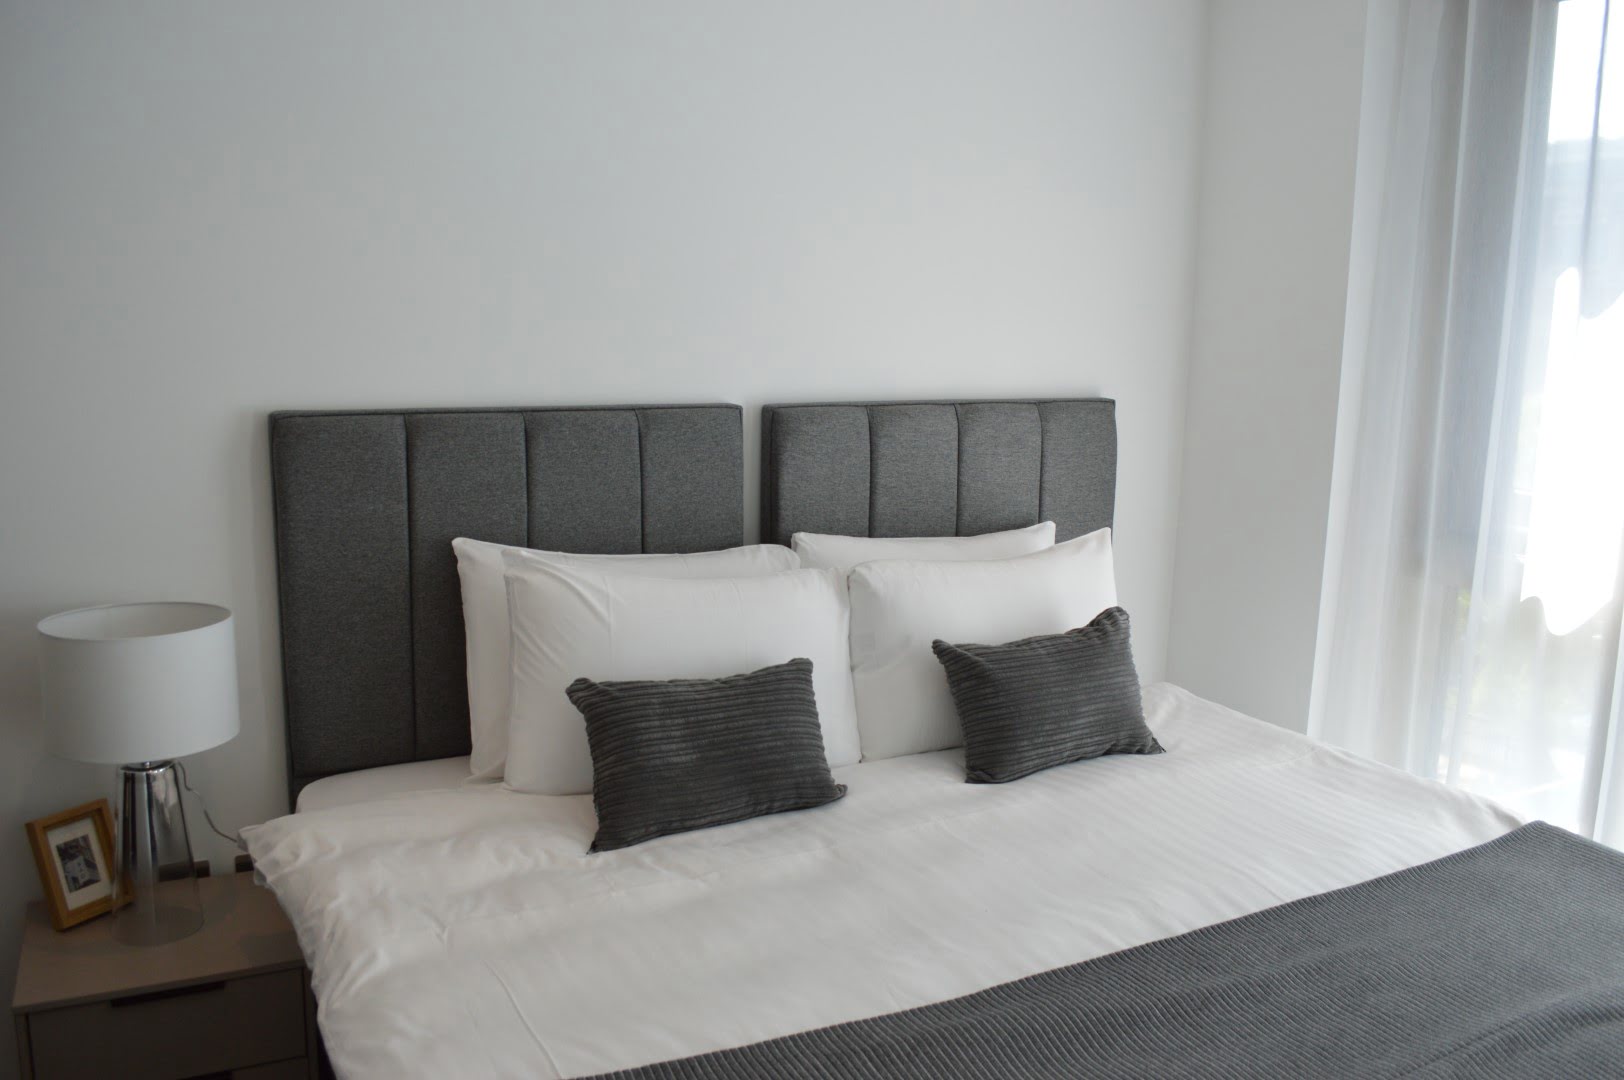 A neatly made bed with white bedding, gray upholstered headboard, two pillows, two gray accent cushions, and a minimalist nightstand with a lamp.